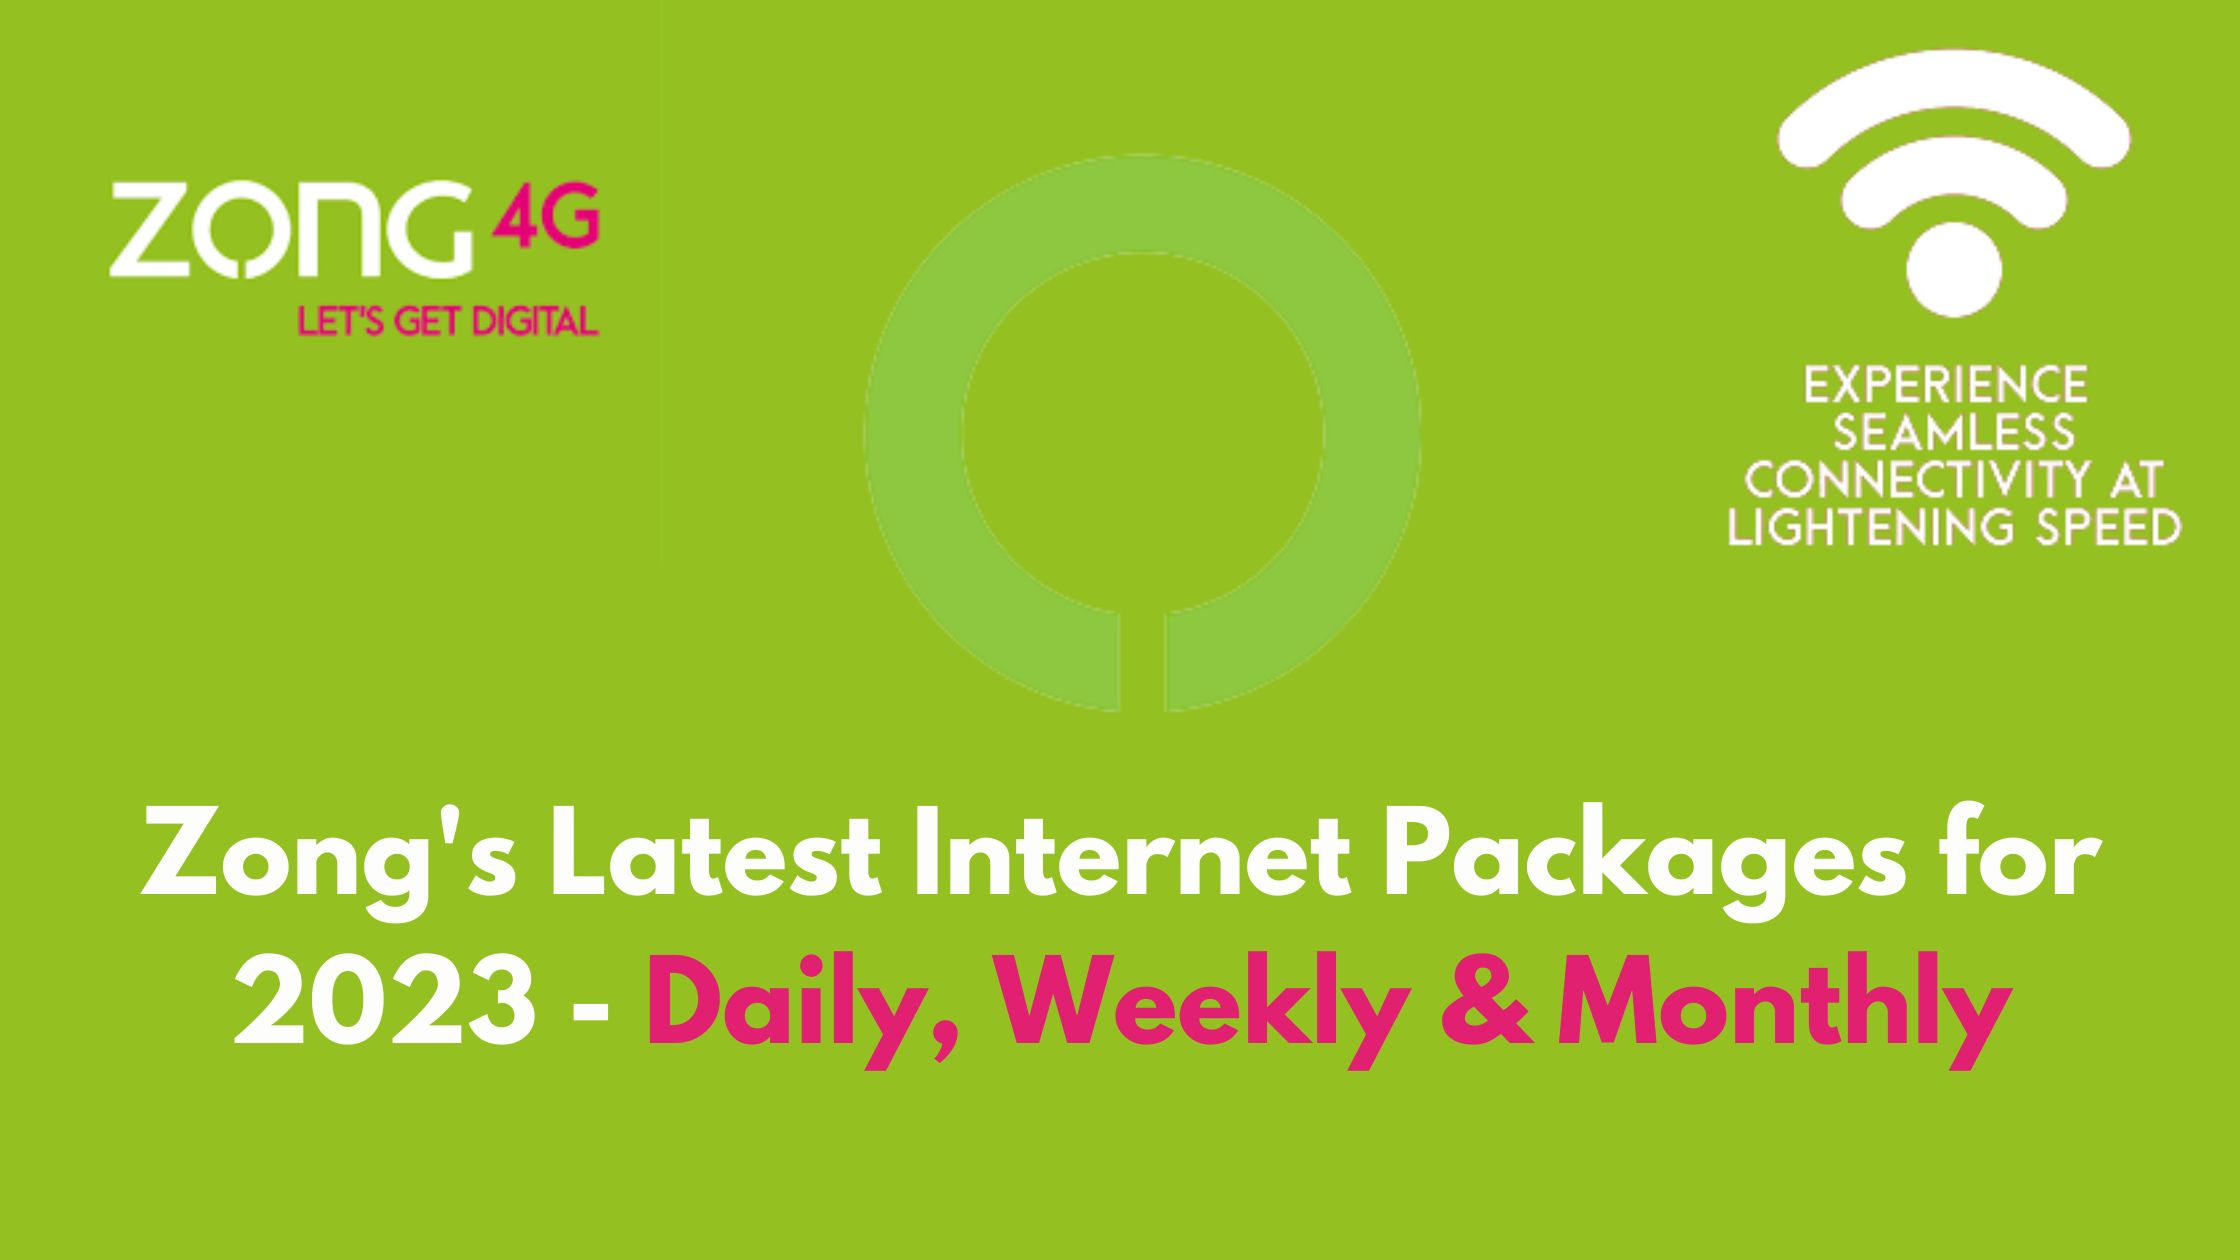 Zong's Latest Internet Packages for 2023 - Daily, Weekly & Monthly